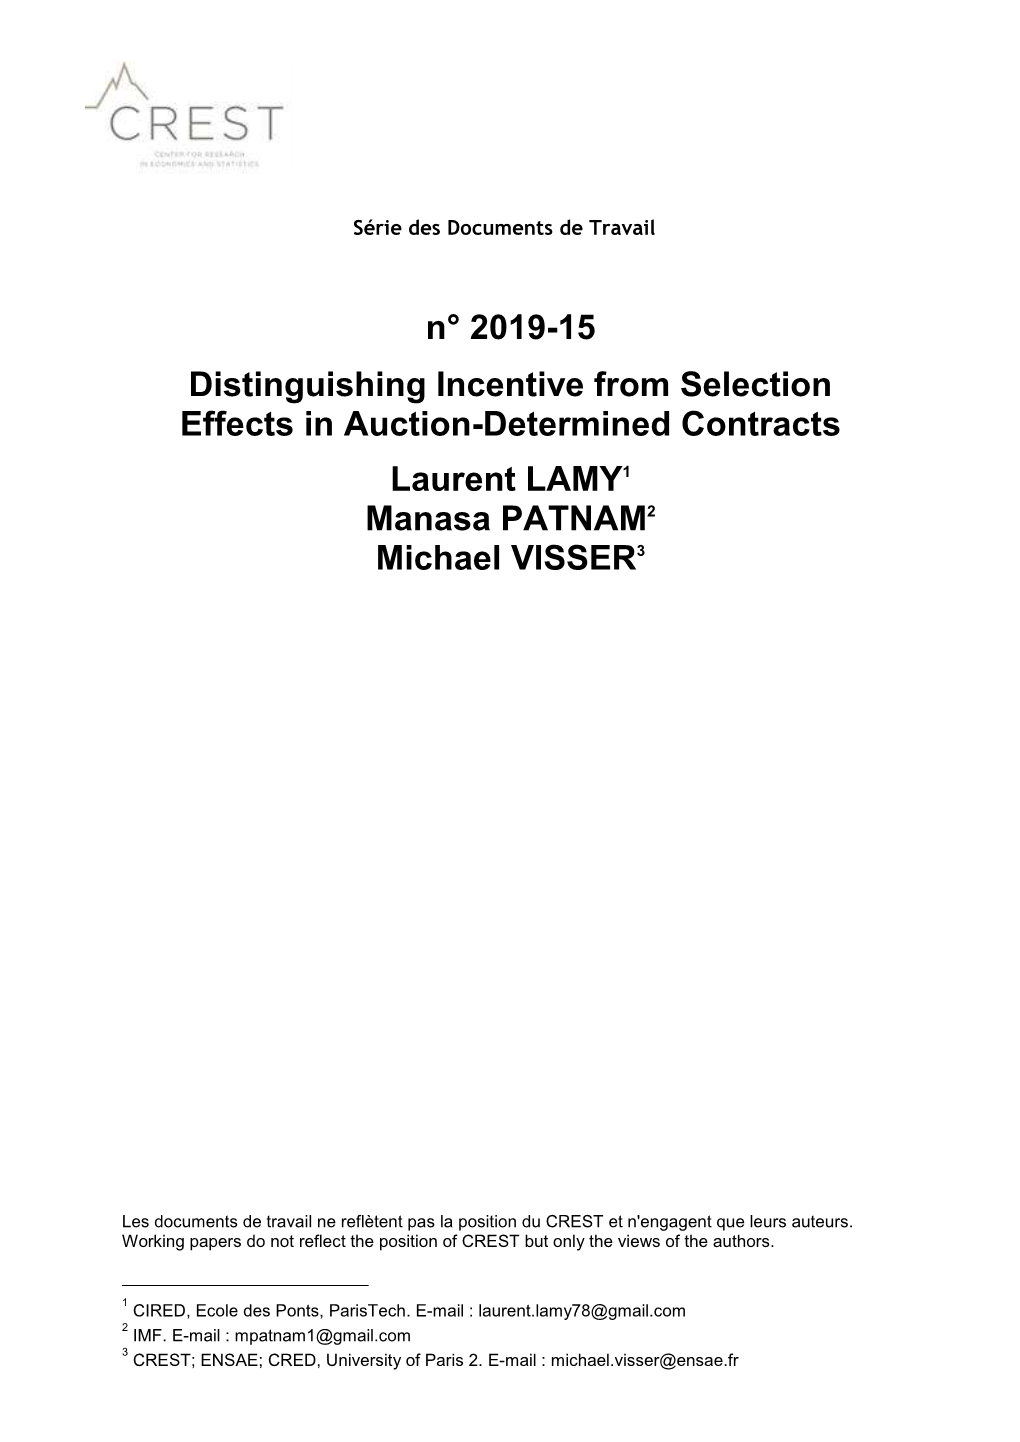 N° 2019-15 Distinguishing Incentive from Selection Effects in Auction